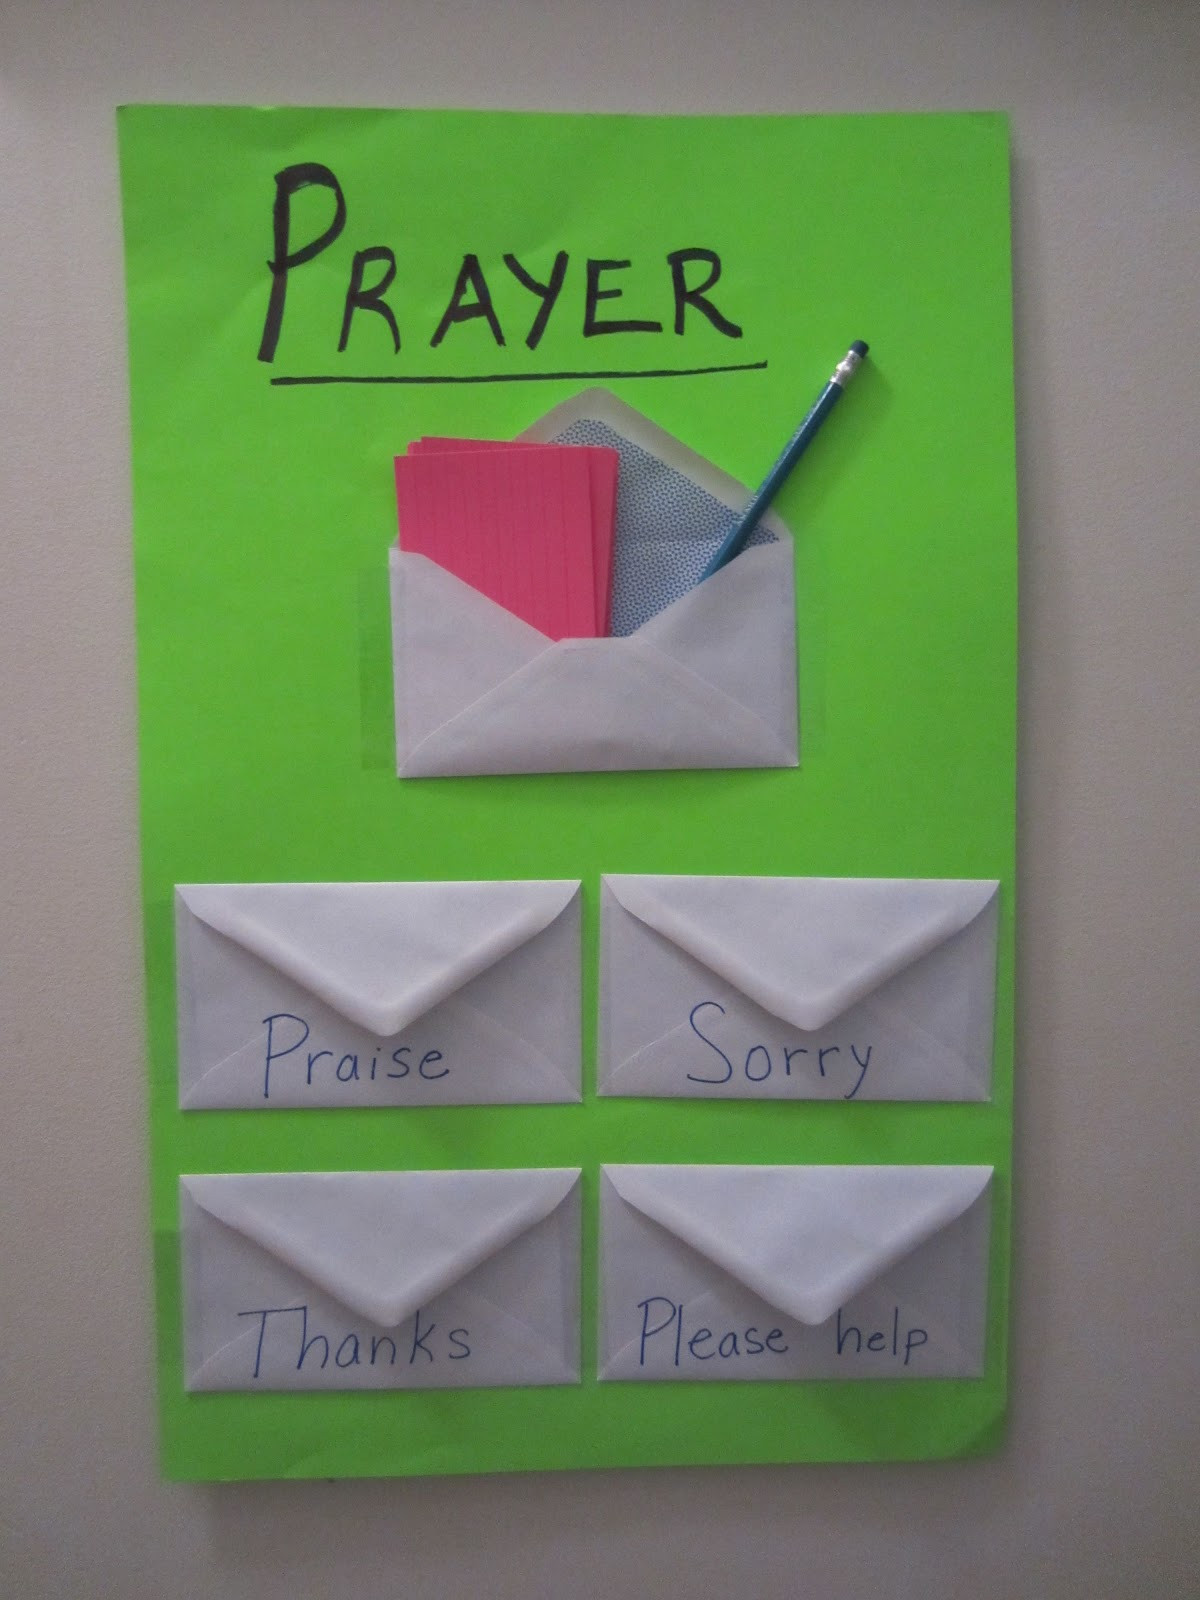 Prayer Craft For Kids
 Turning Our Hearts Teaching Our Children to Pray